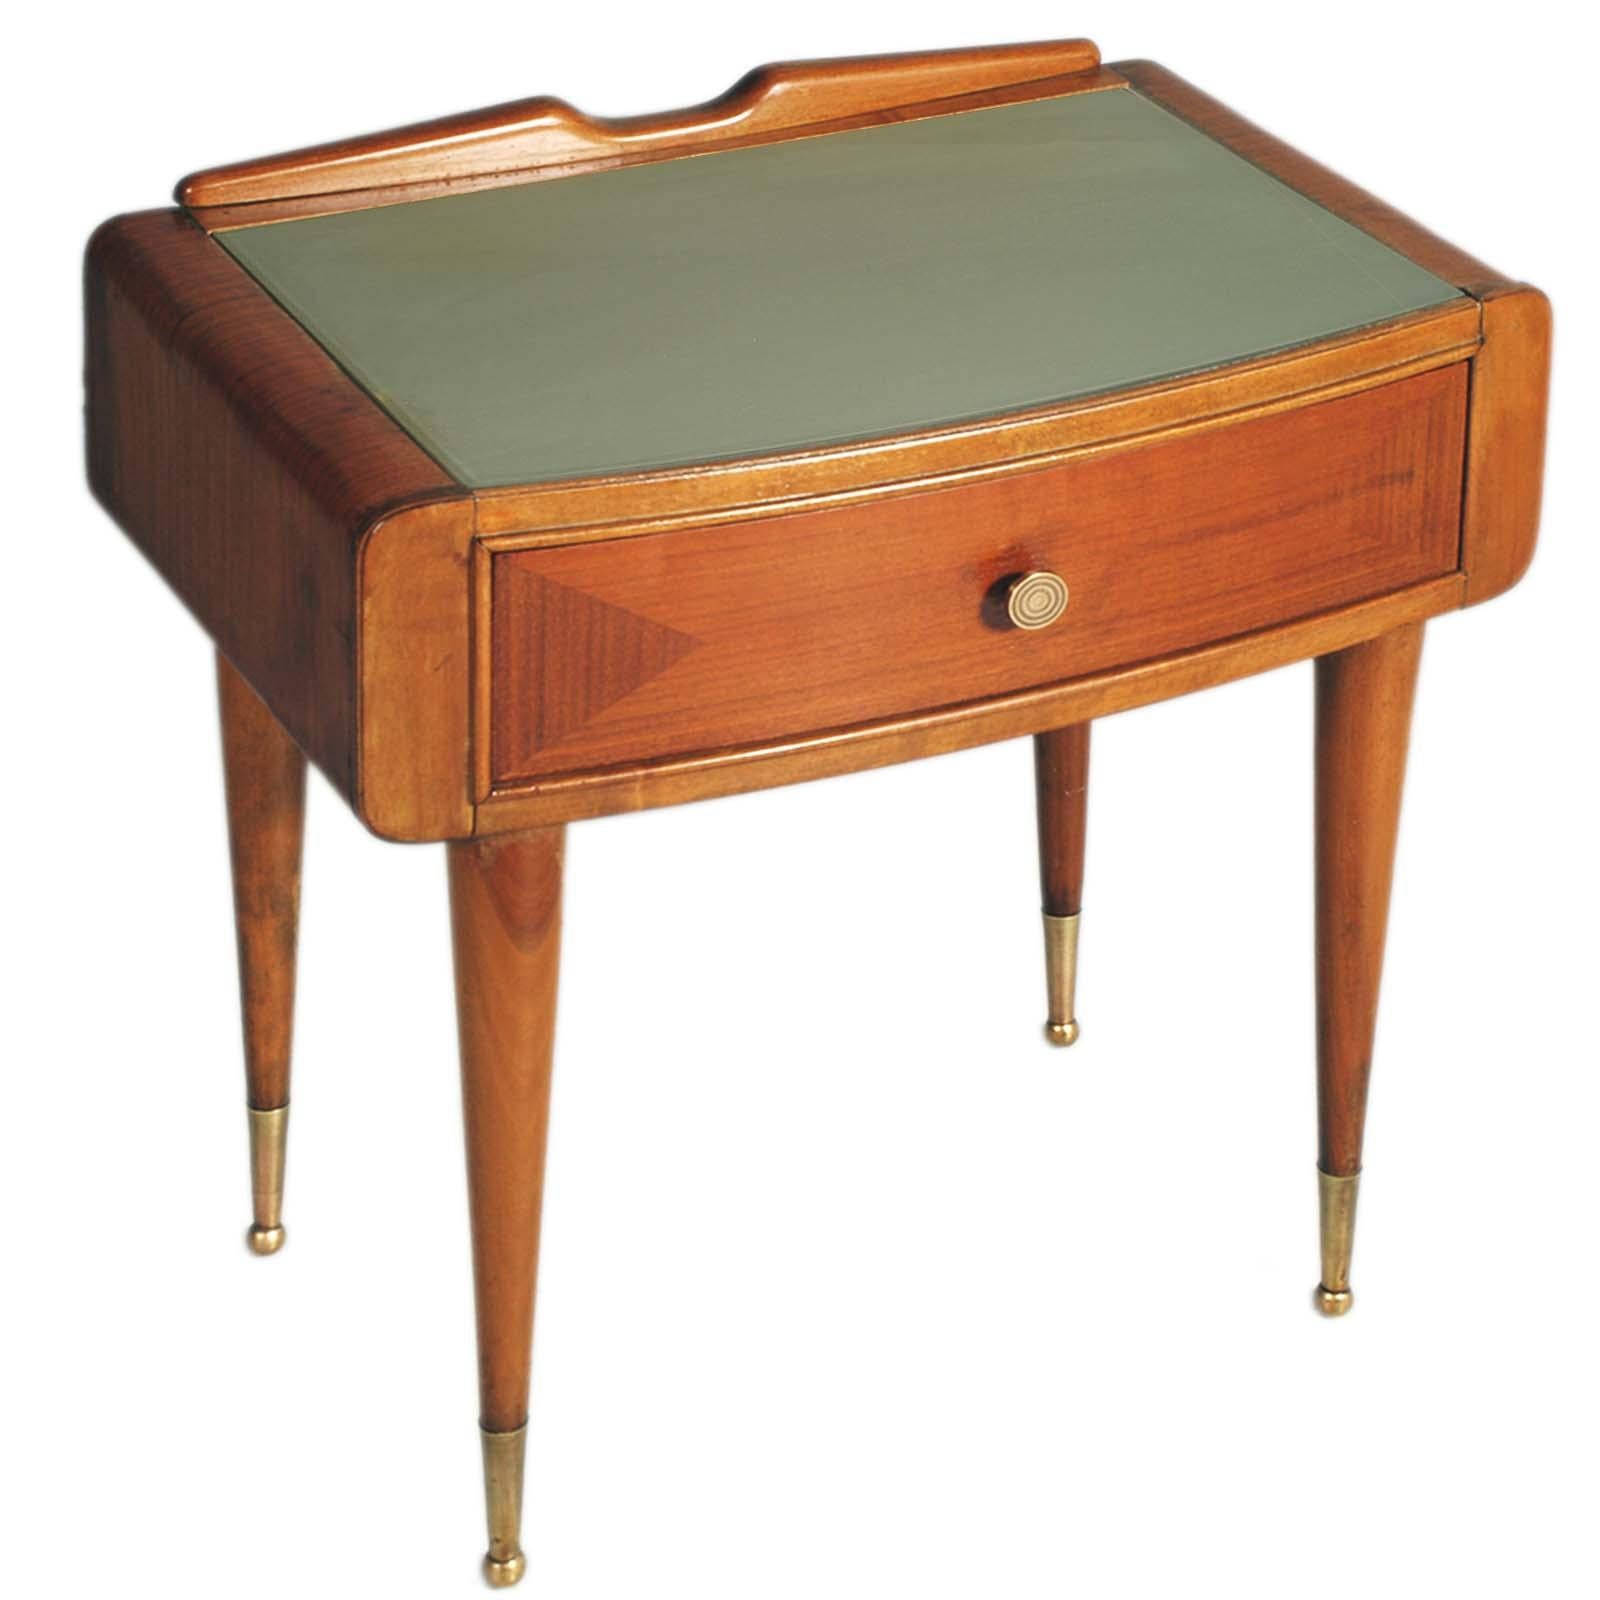 1950s bedside table attributed to Paolo Buffa for Mobile di Cantù, in solid walnut and veneered walnut front drawer, painted glass top, gilded brass accessories.

ABOUT PAOLO BUFFA
One of the greatest Mid Century Modern designers in Italy and  in